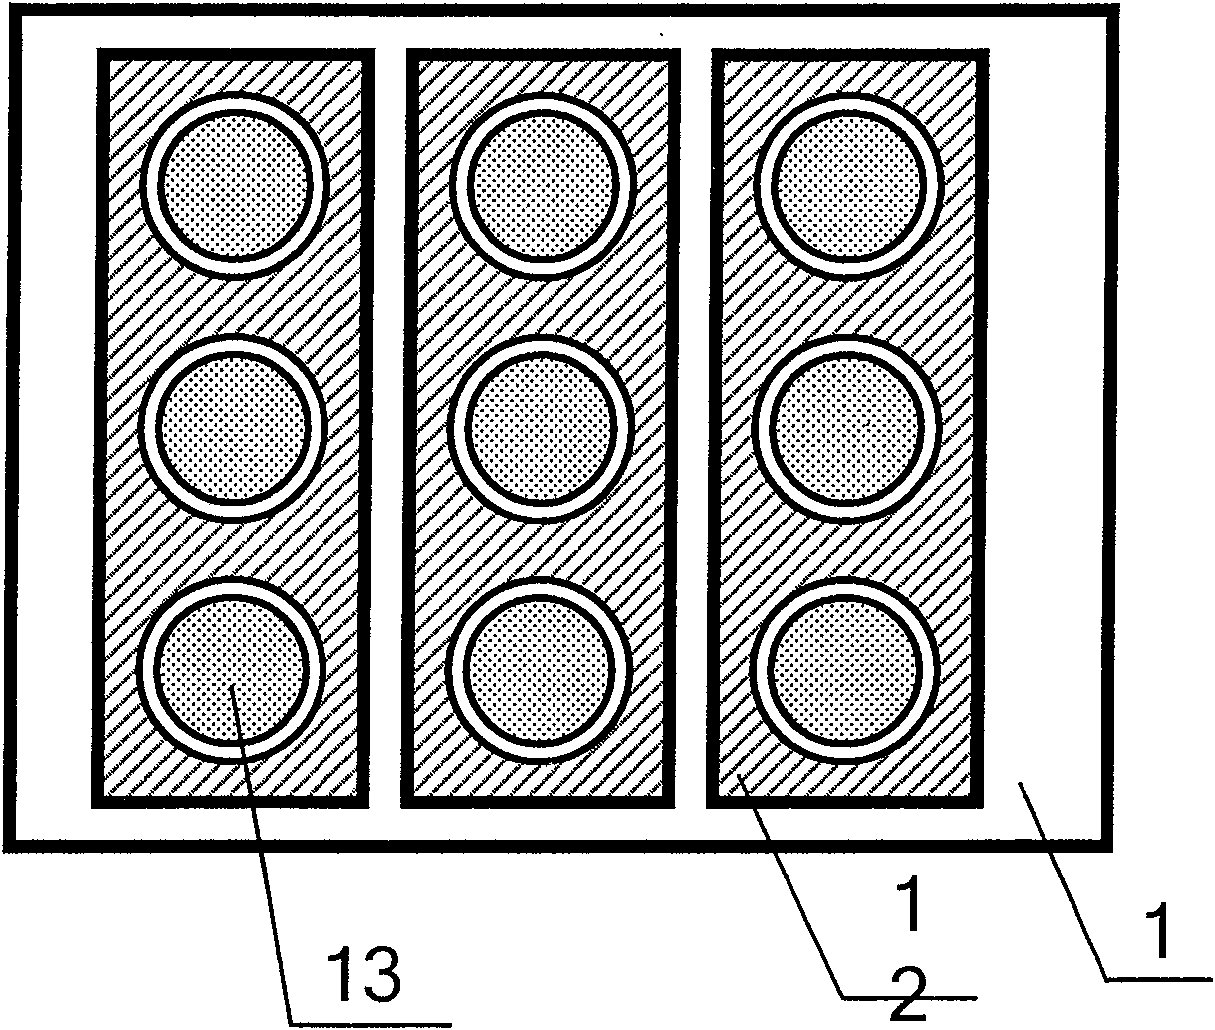 Flat-panel display device with internal gate-modulated multi-angle cathode structure and its preparing process